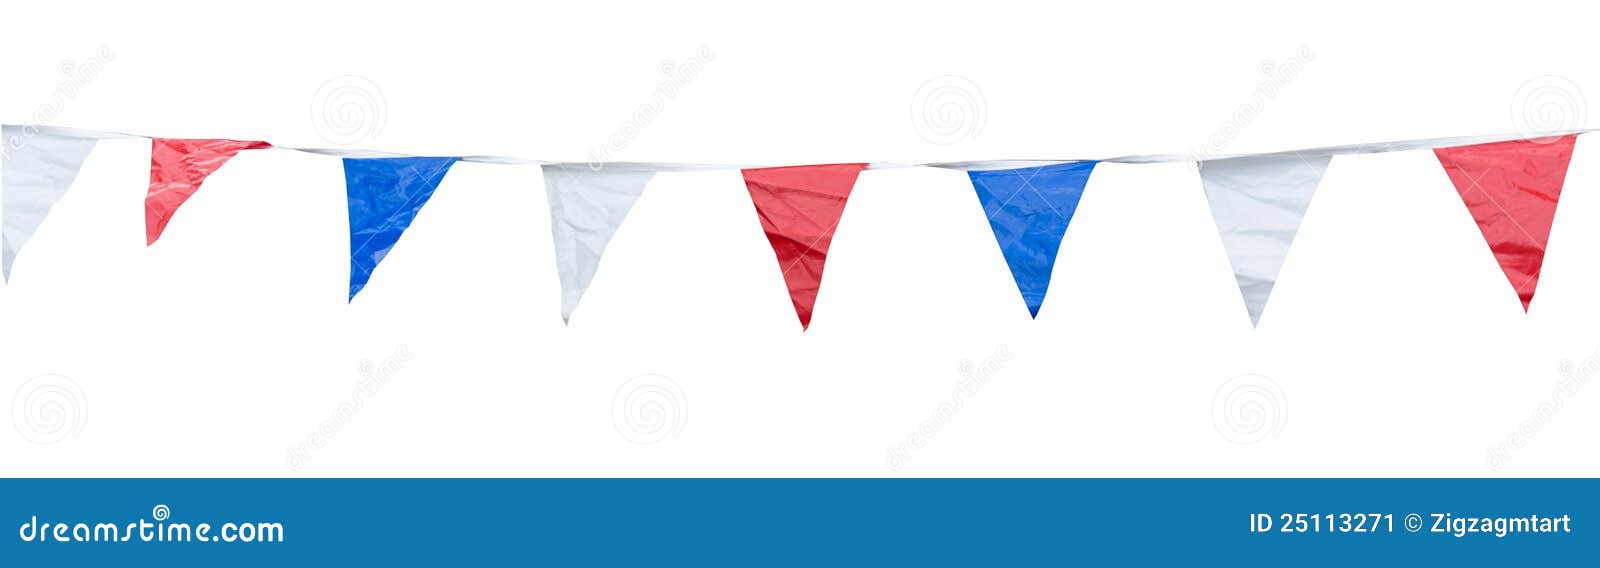 Colorful Triangle Flags on Rope Stock Image - Image of access